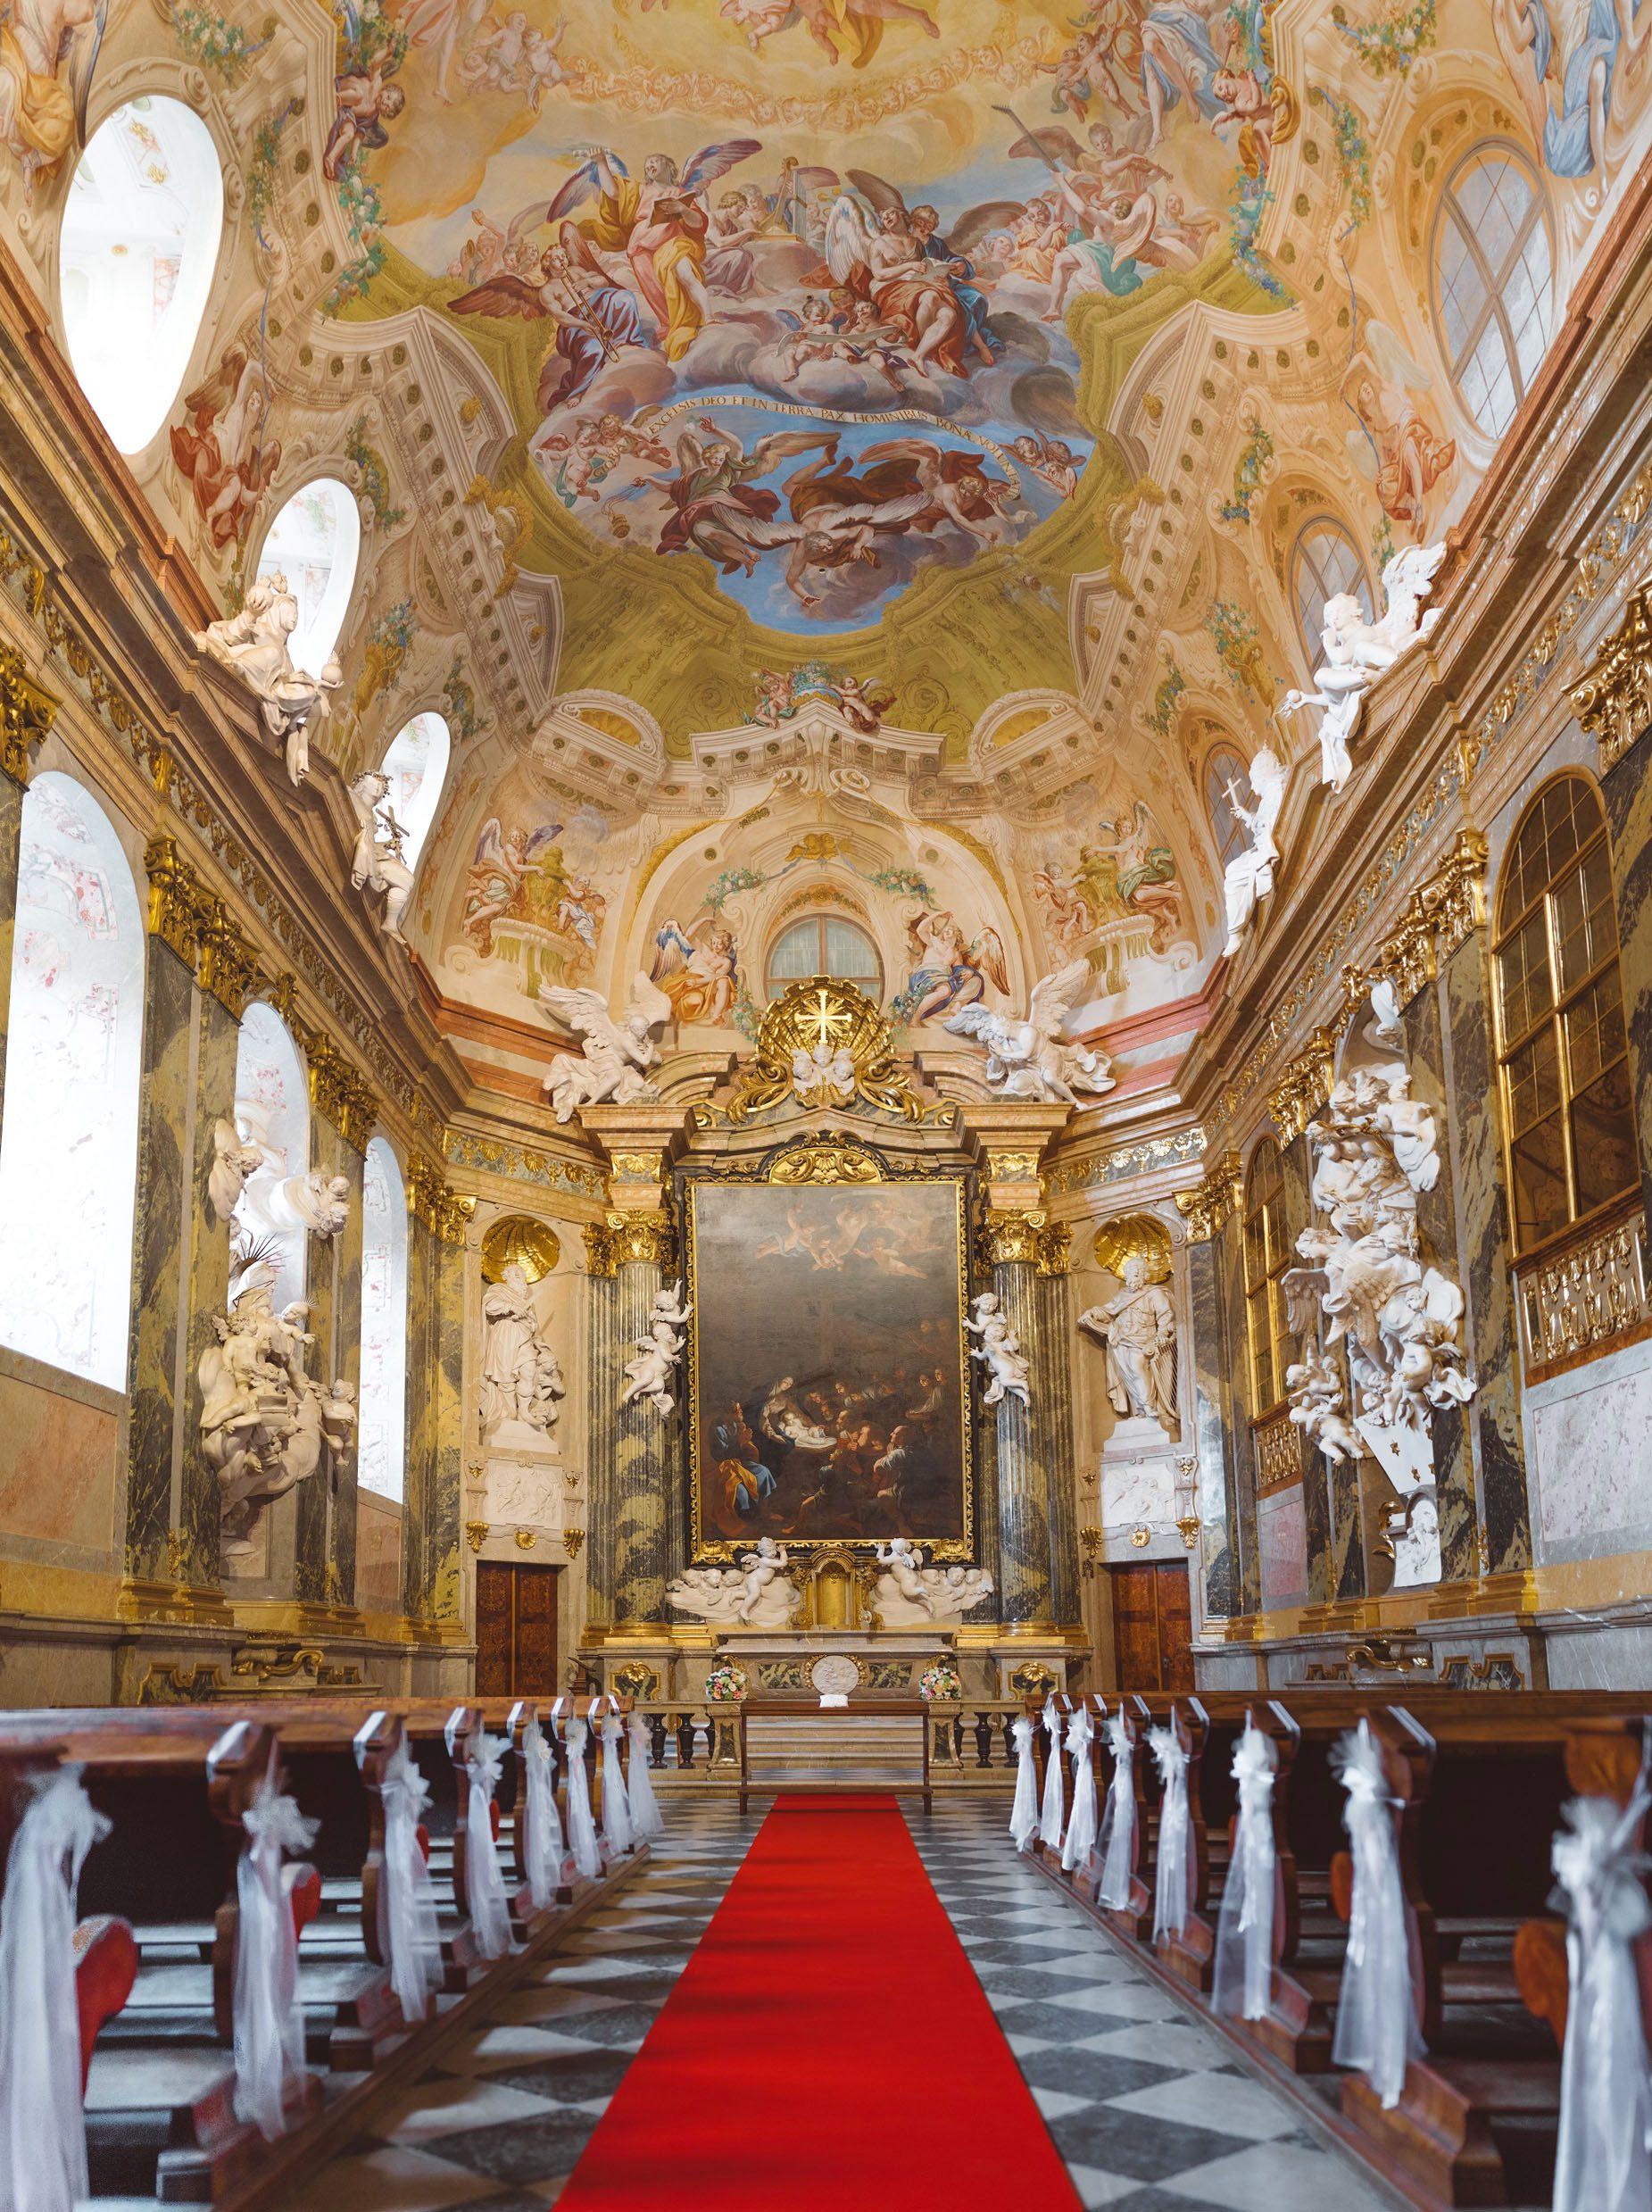 Valtice's unique, exquisitely decorated and well-preserved Baroque chapel from 1730 provides a splendid space for wedding ceremonies, both civil and religious. – © Jiří Wasserbauer